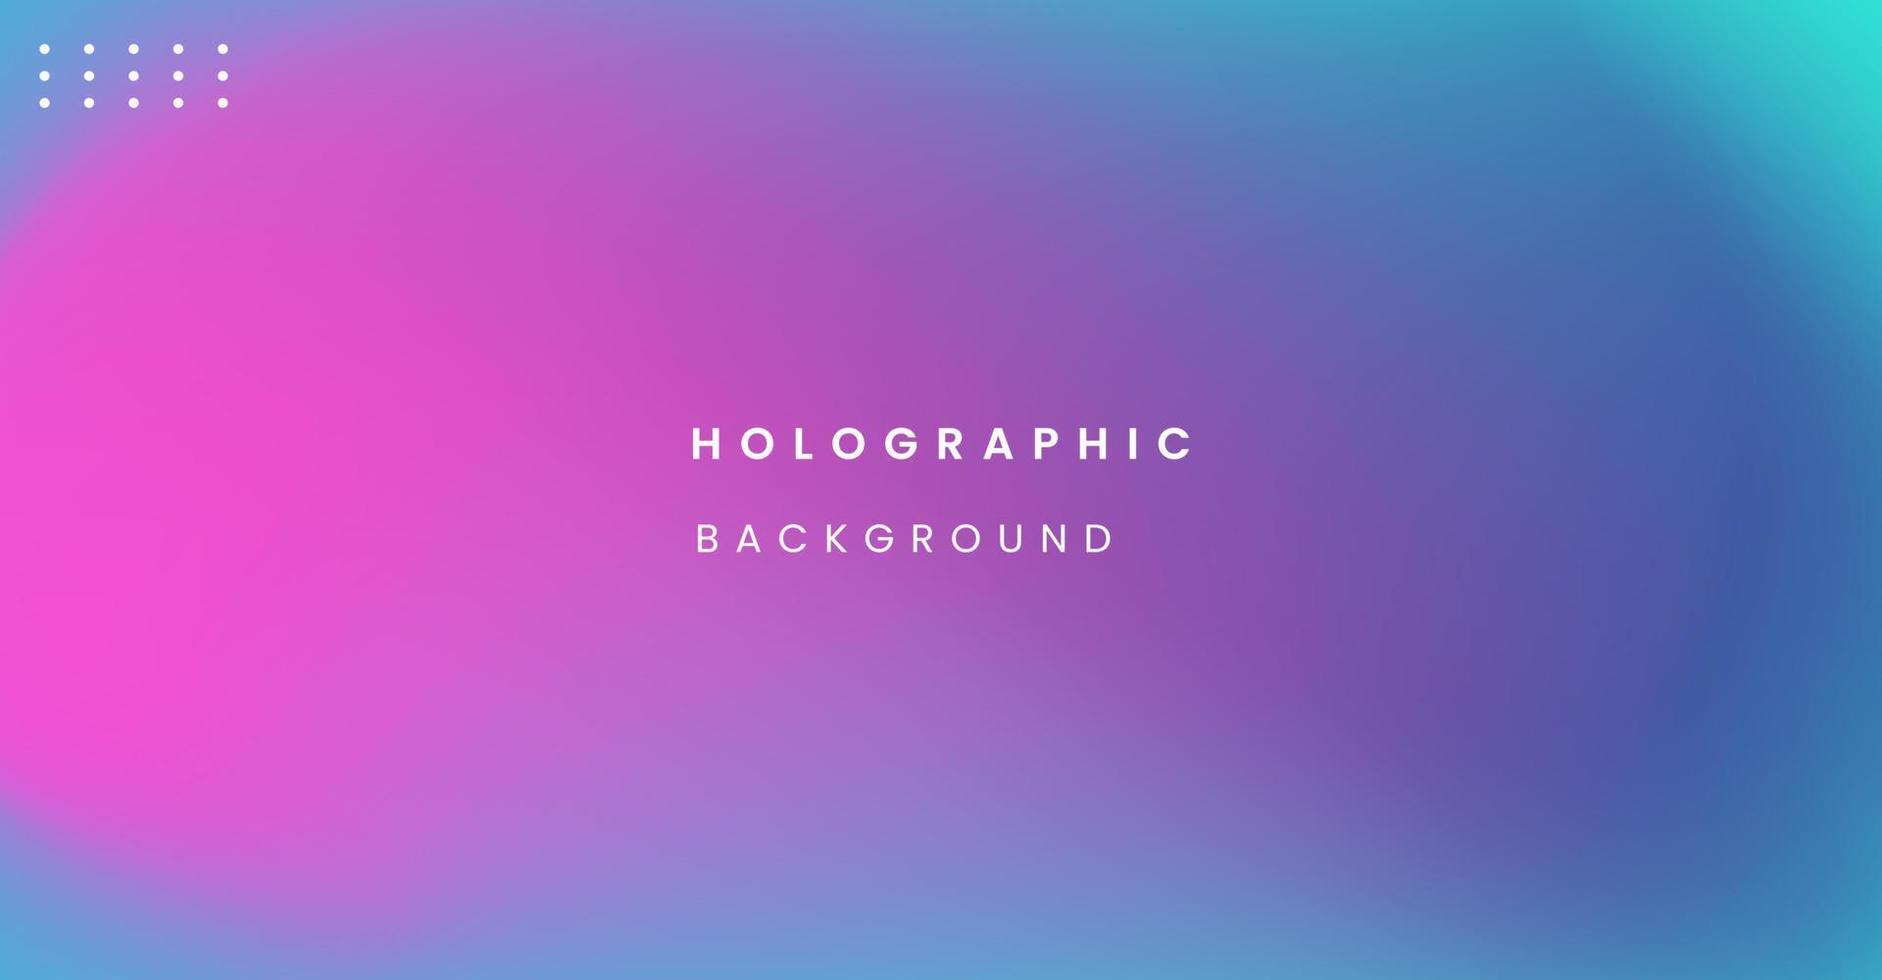 Blurred abstract with pink and blue color background vector